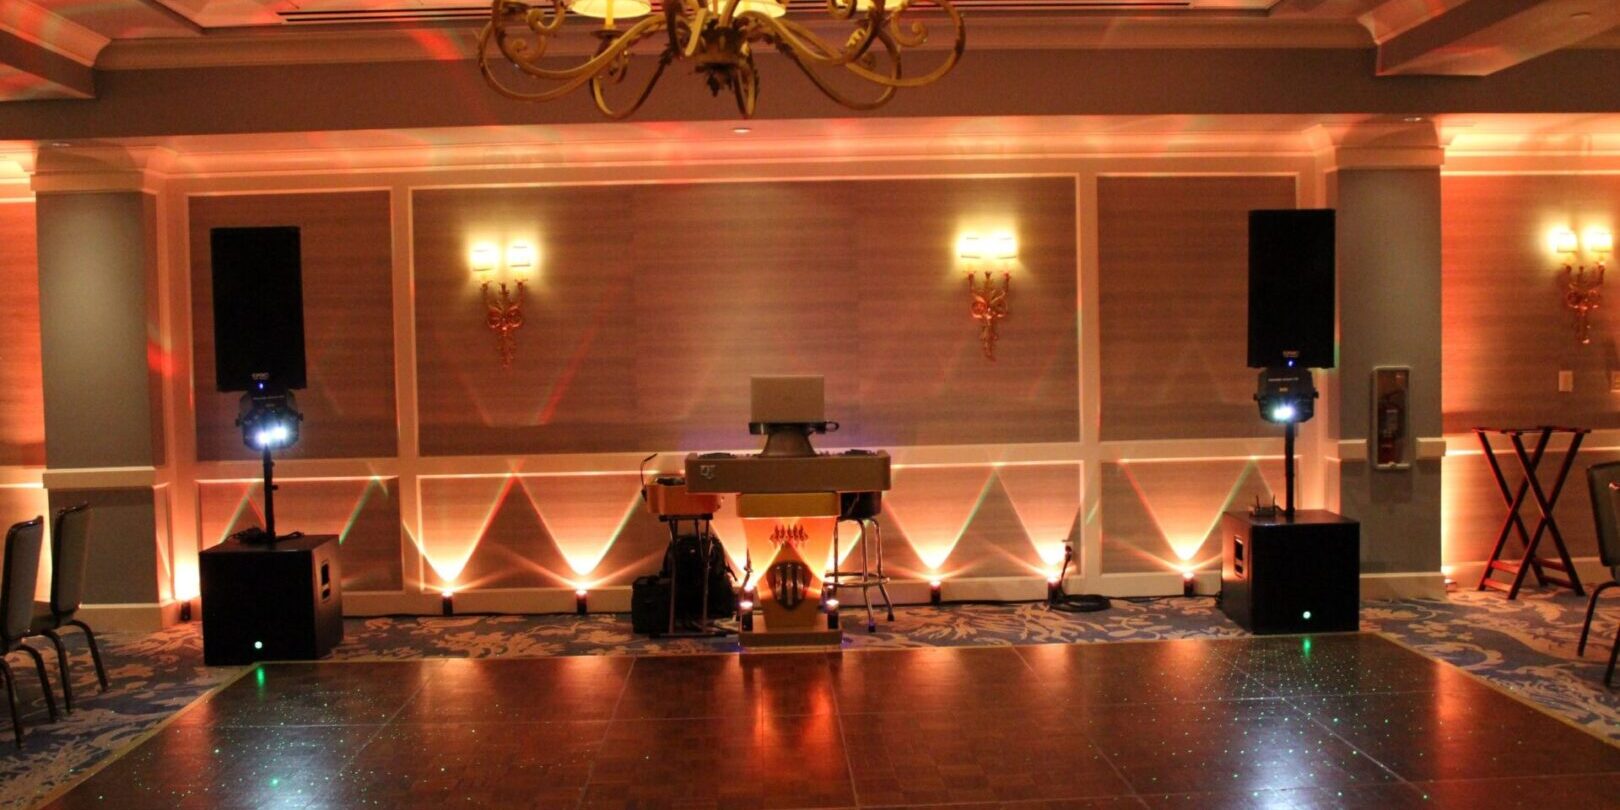 LED up lighting at the Monterey Plaza Hotel in Monterey California, provided by wedding DJs, DJ Enterprises Mobile Disc Jockey and Luxury Photo Booth rental